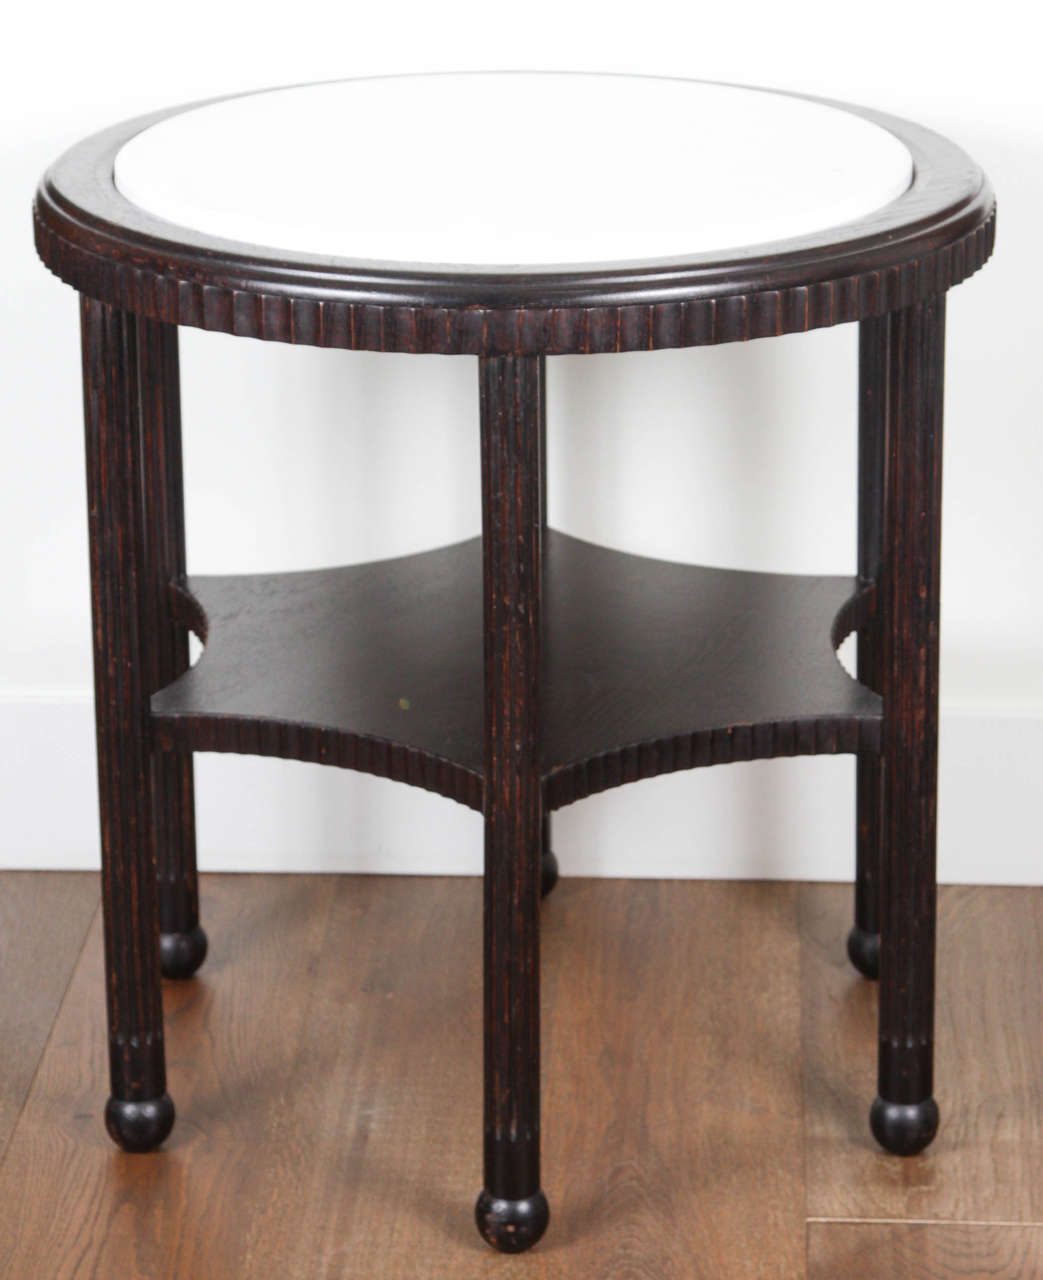 1970s round ebony stained side table with marble top, fluted apron and six legs supported on turned feet.